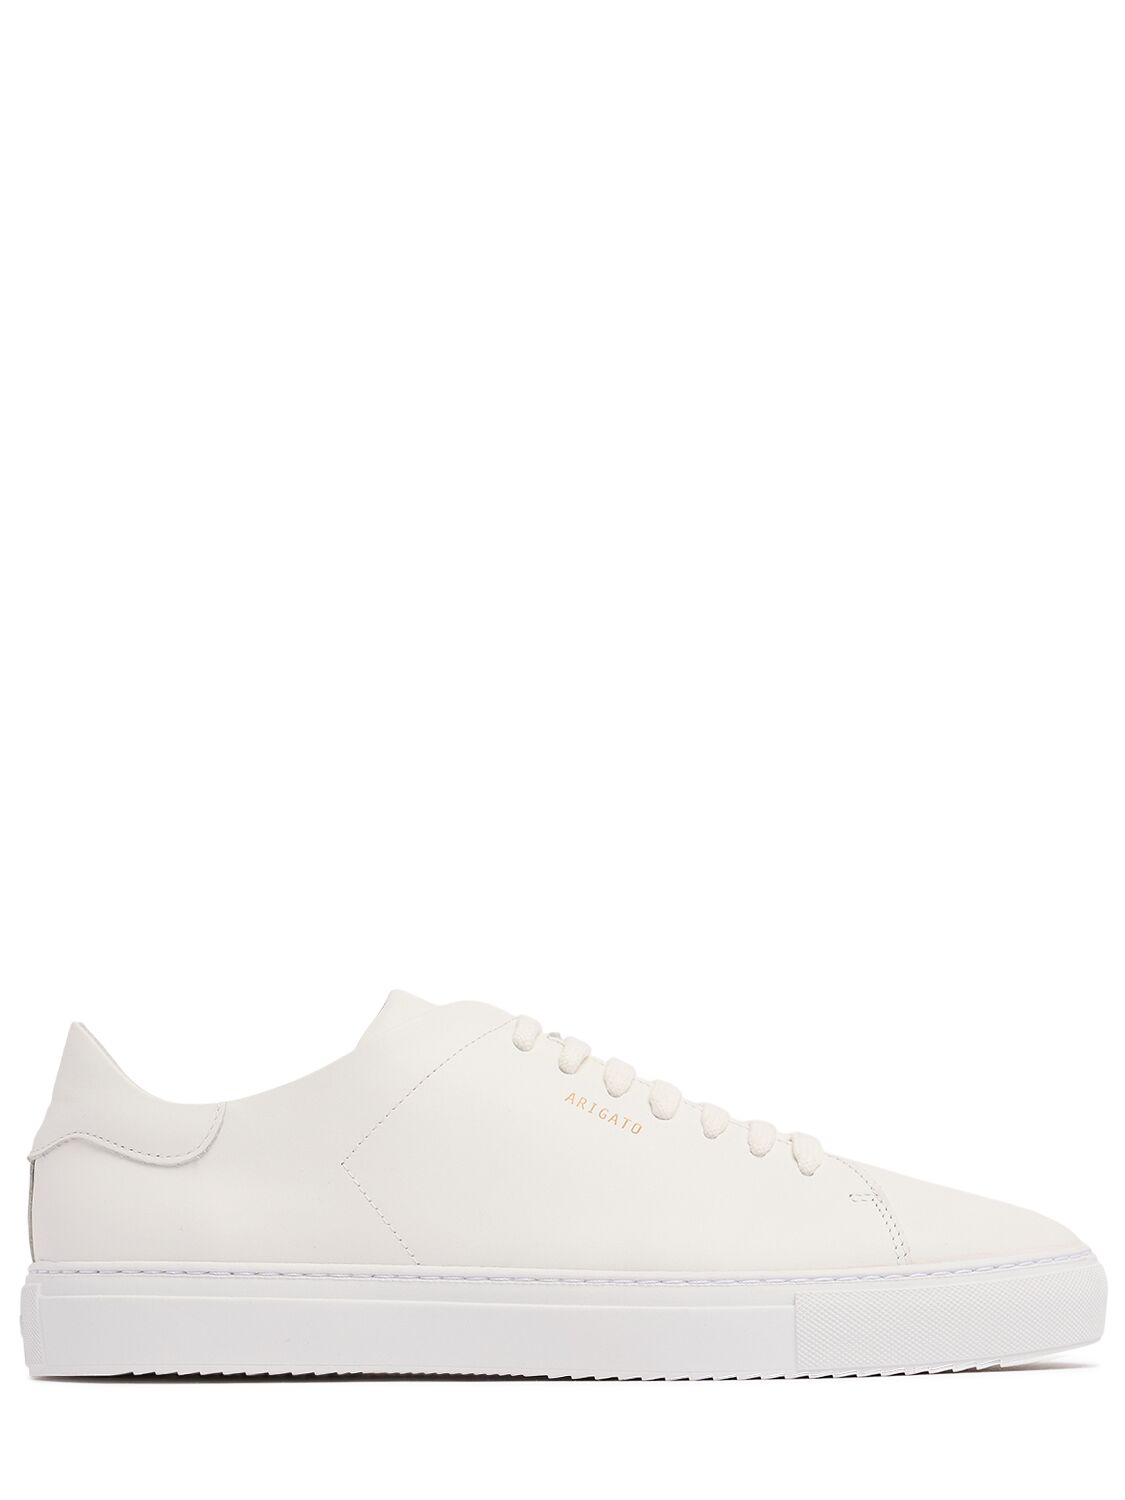 Clean 90 Brushed Leather Sneakers - AXEL ARIGATO - Modalova